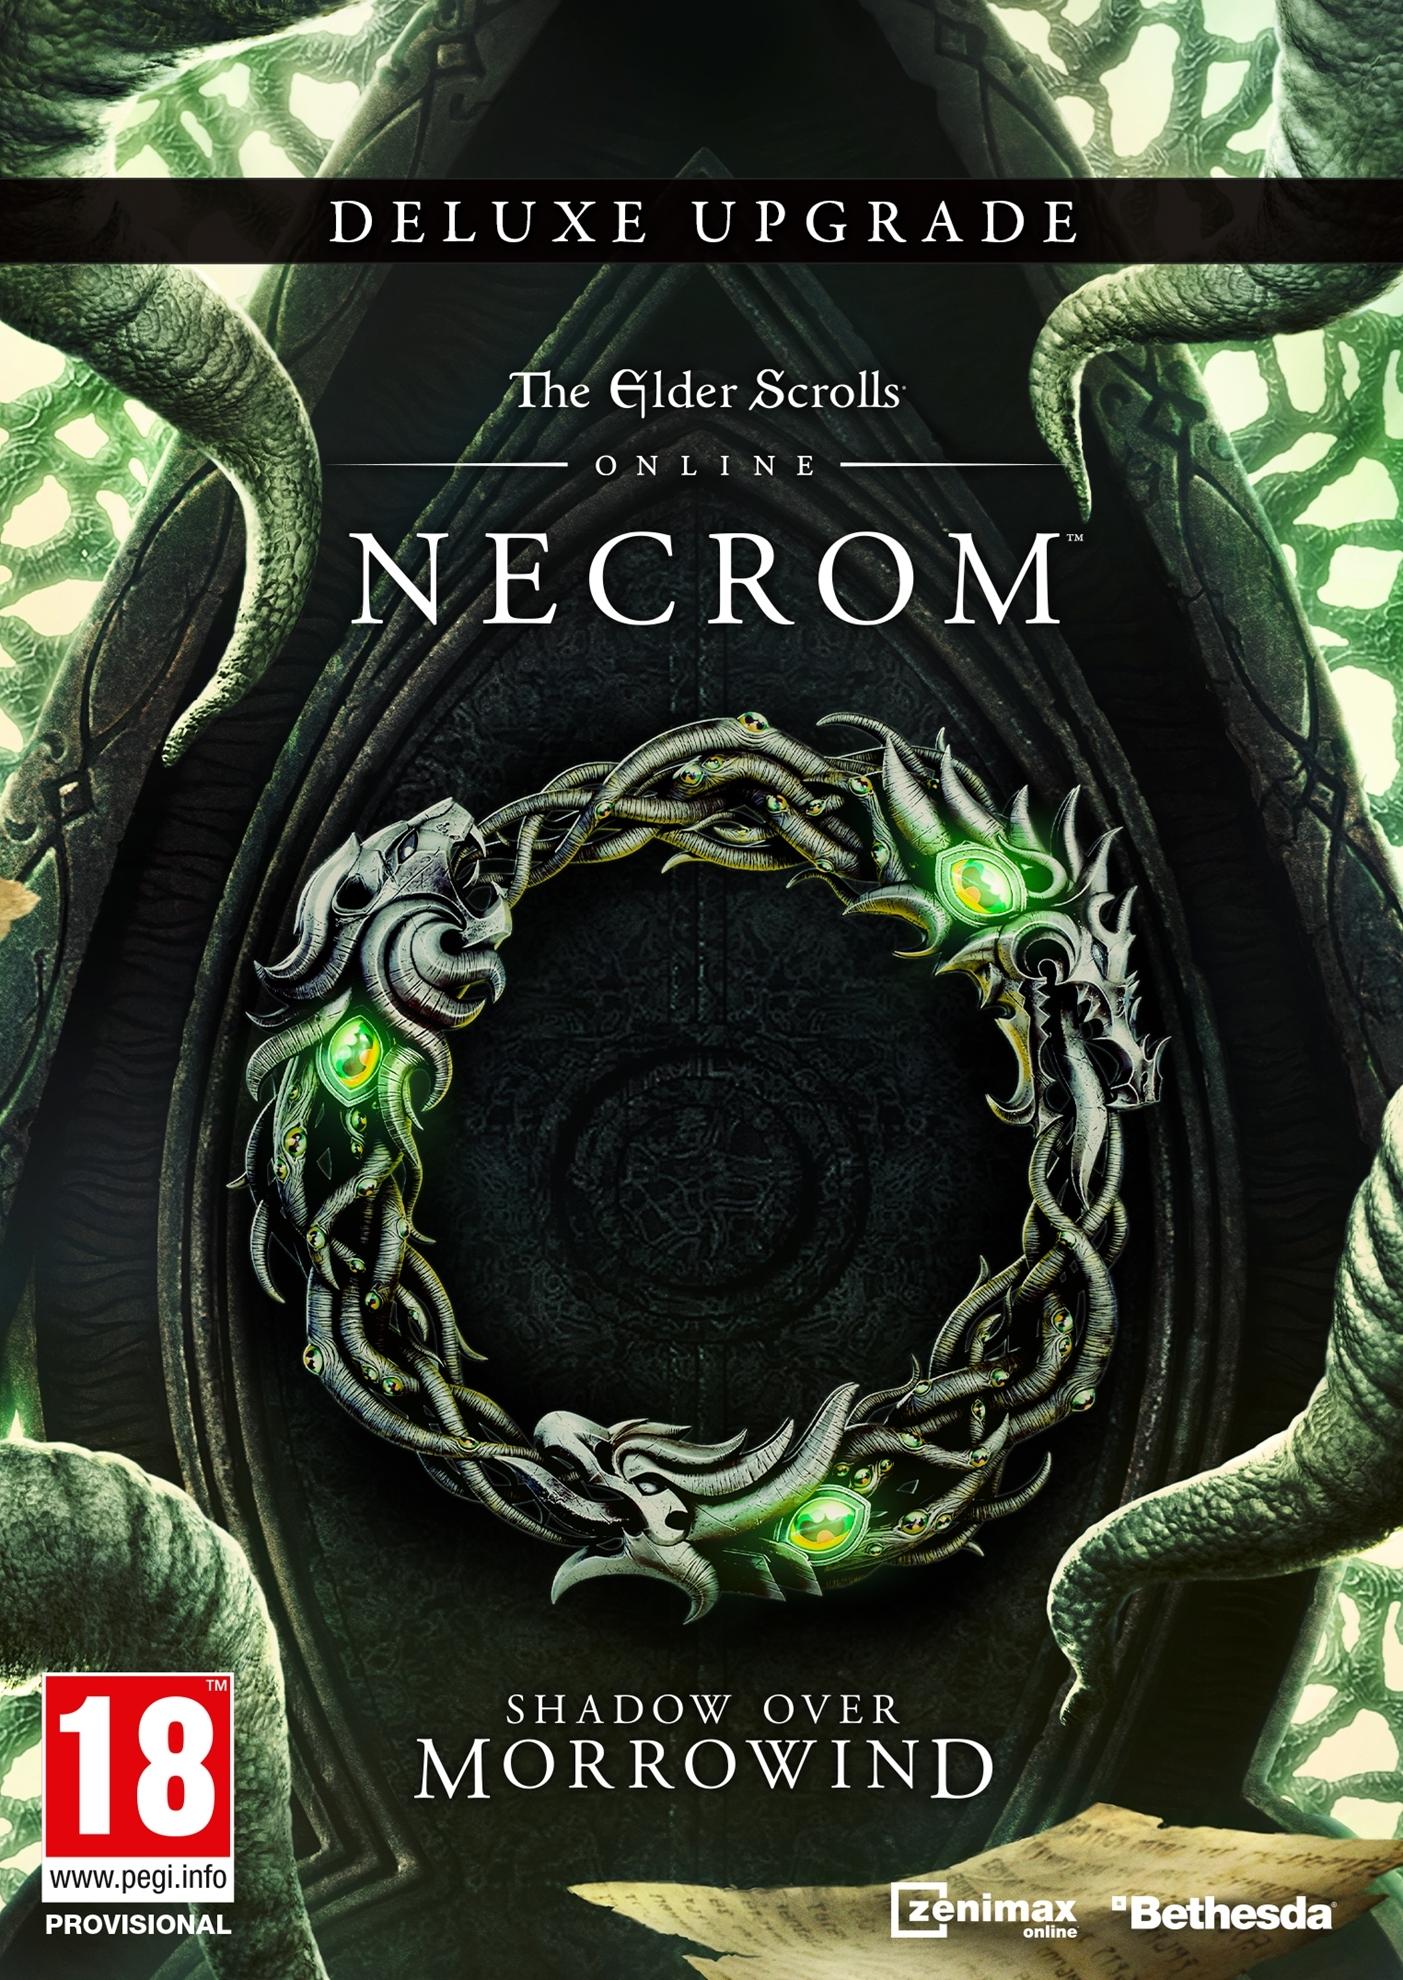 The Elder Scrolls Online Deluxe Upgrade: Necrom Limited Time Offer Pre Order (Steam) | ROW 4 (51c6aee8-0eba-4b35-b127-92eb98b8be6d)